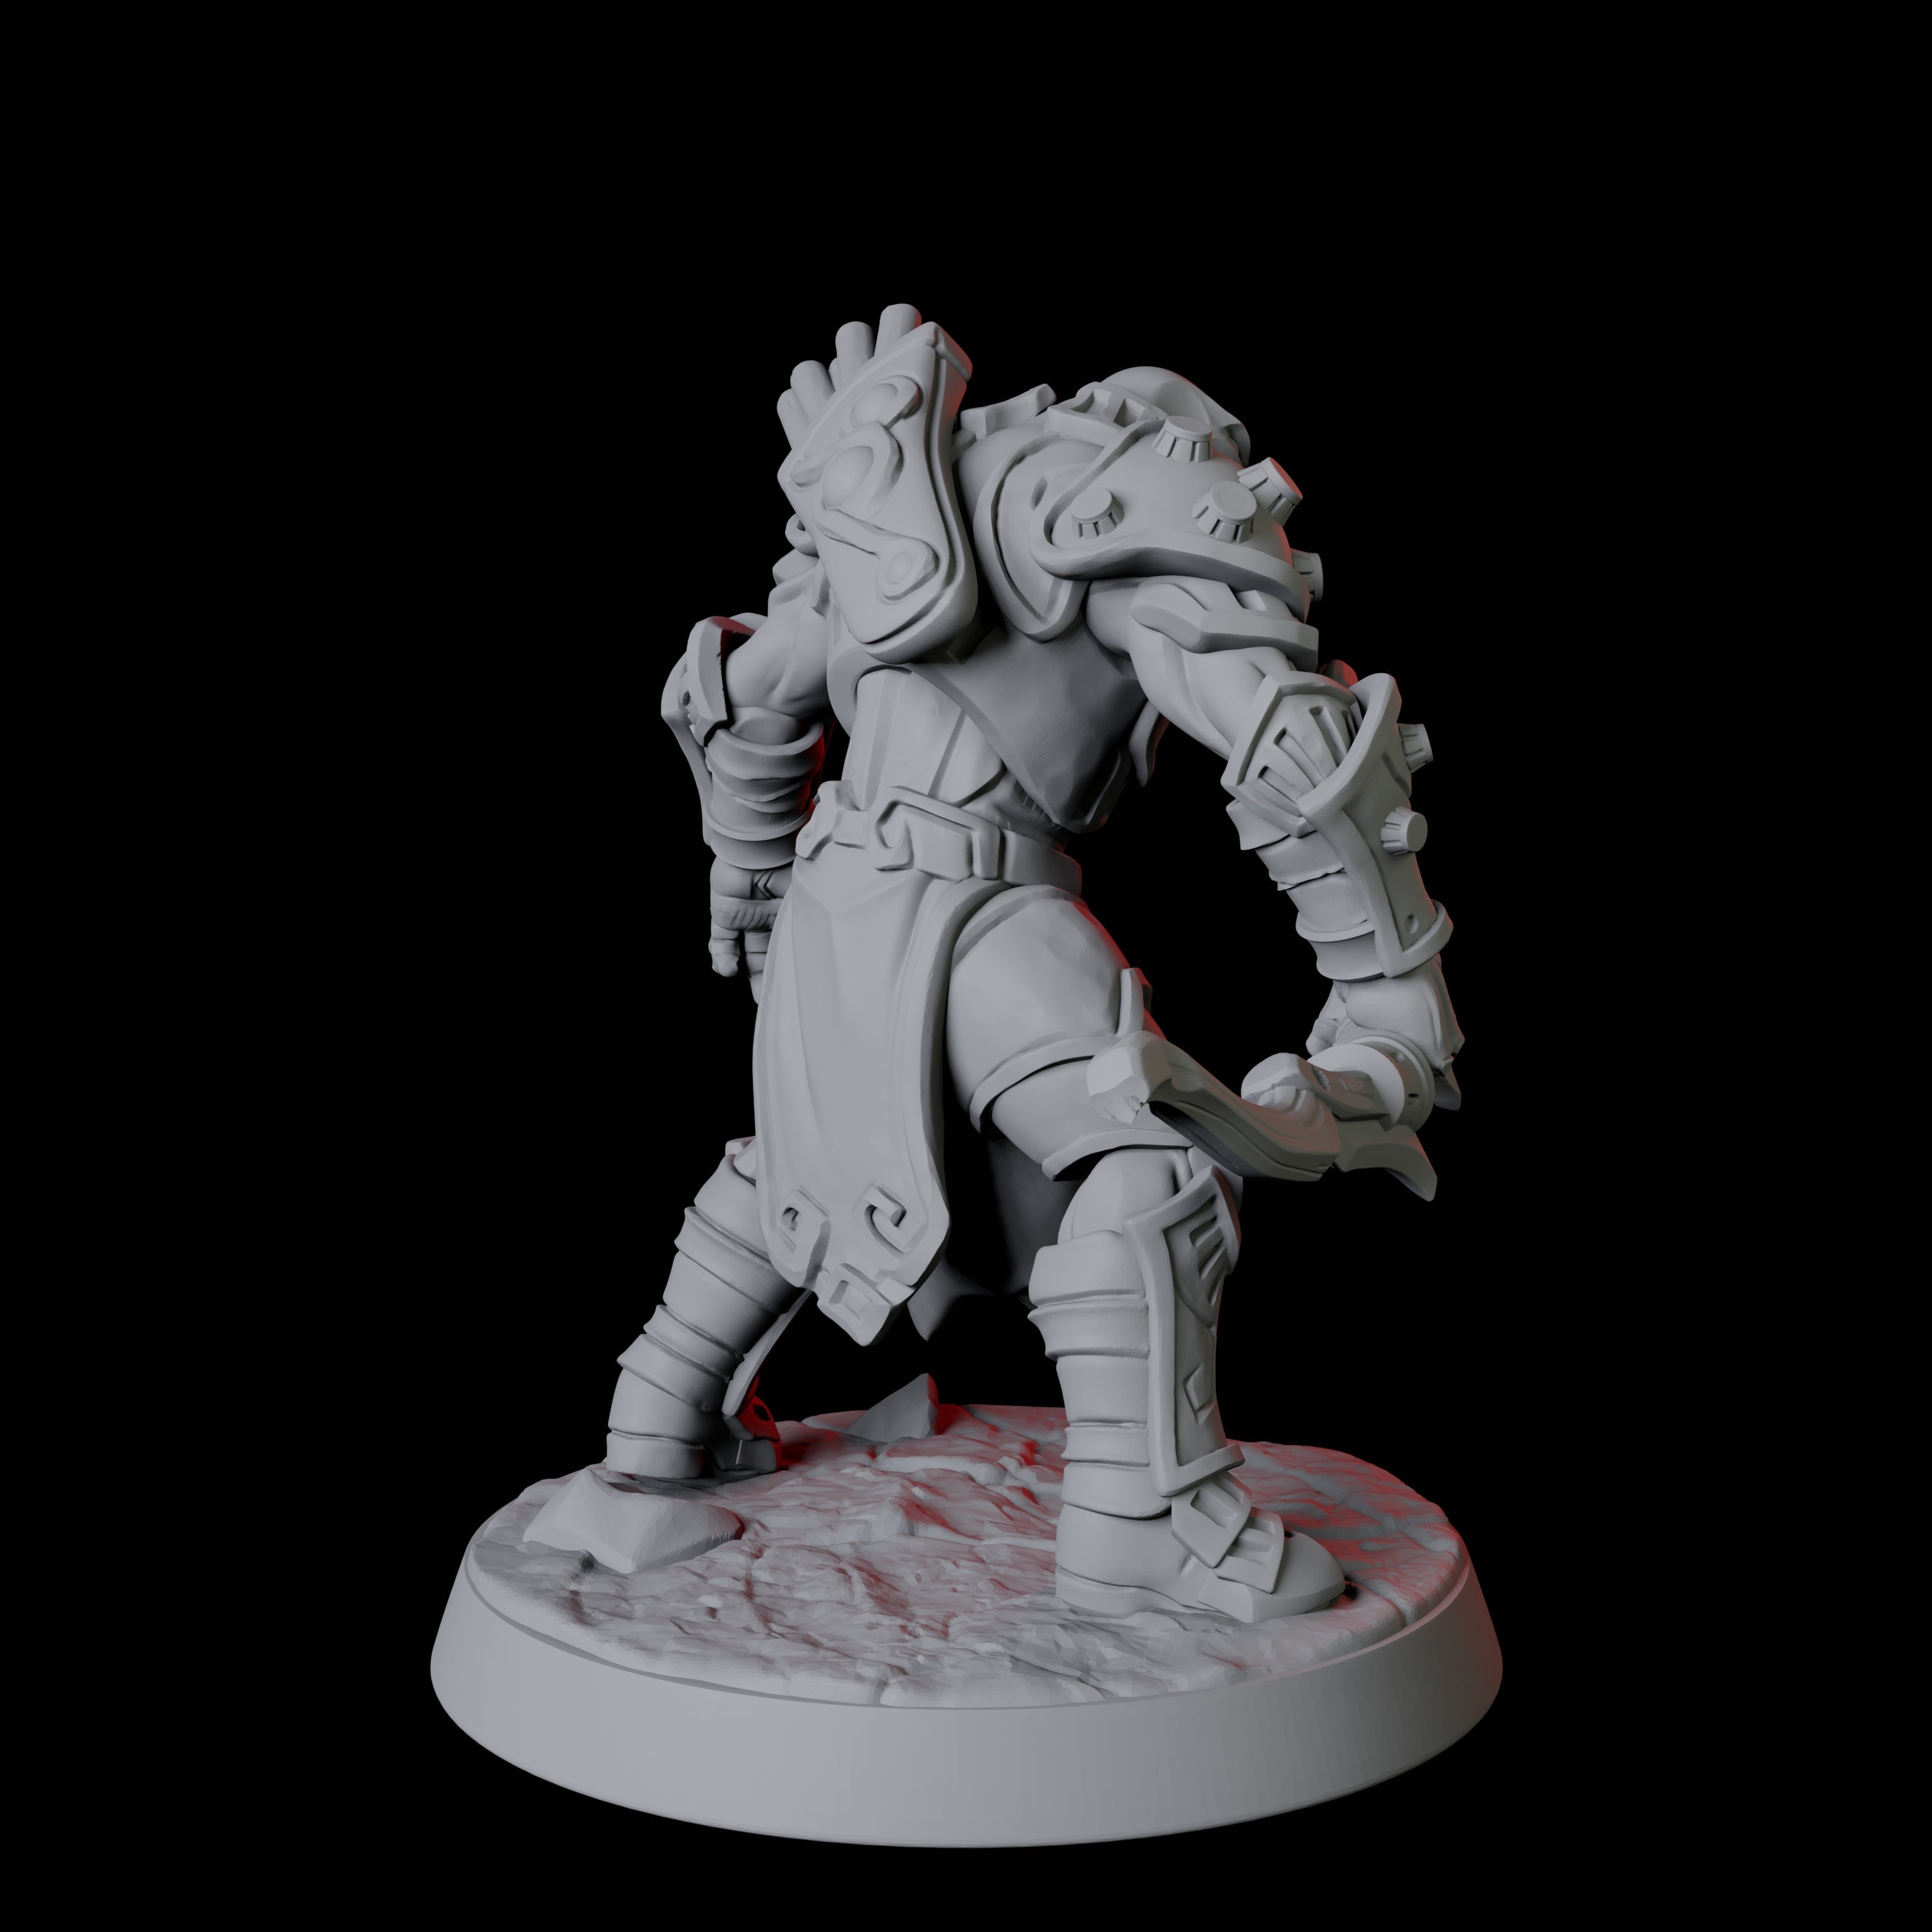 Battle-Ready Warforged C Miniature for Dungeons and Dragons, Pathfinder or other TTRPGs